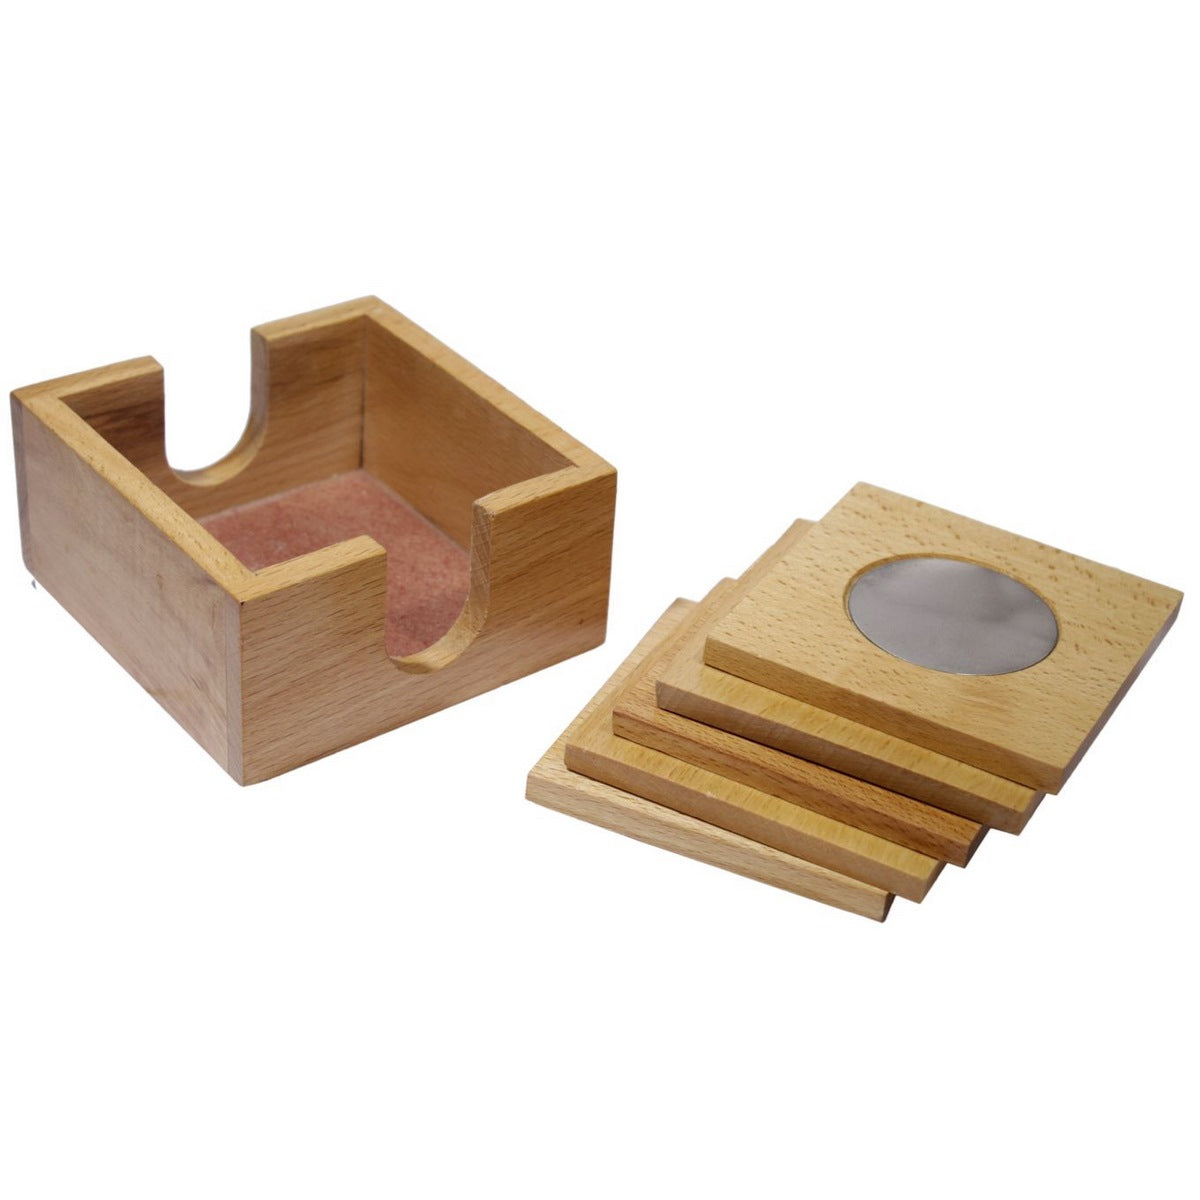 Set of 6 Brown Square Wooden Tea Coaster - For Corporate Gifting, Office Use, Personal Use, Return Gift